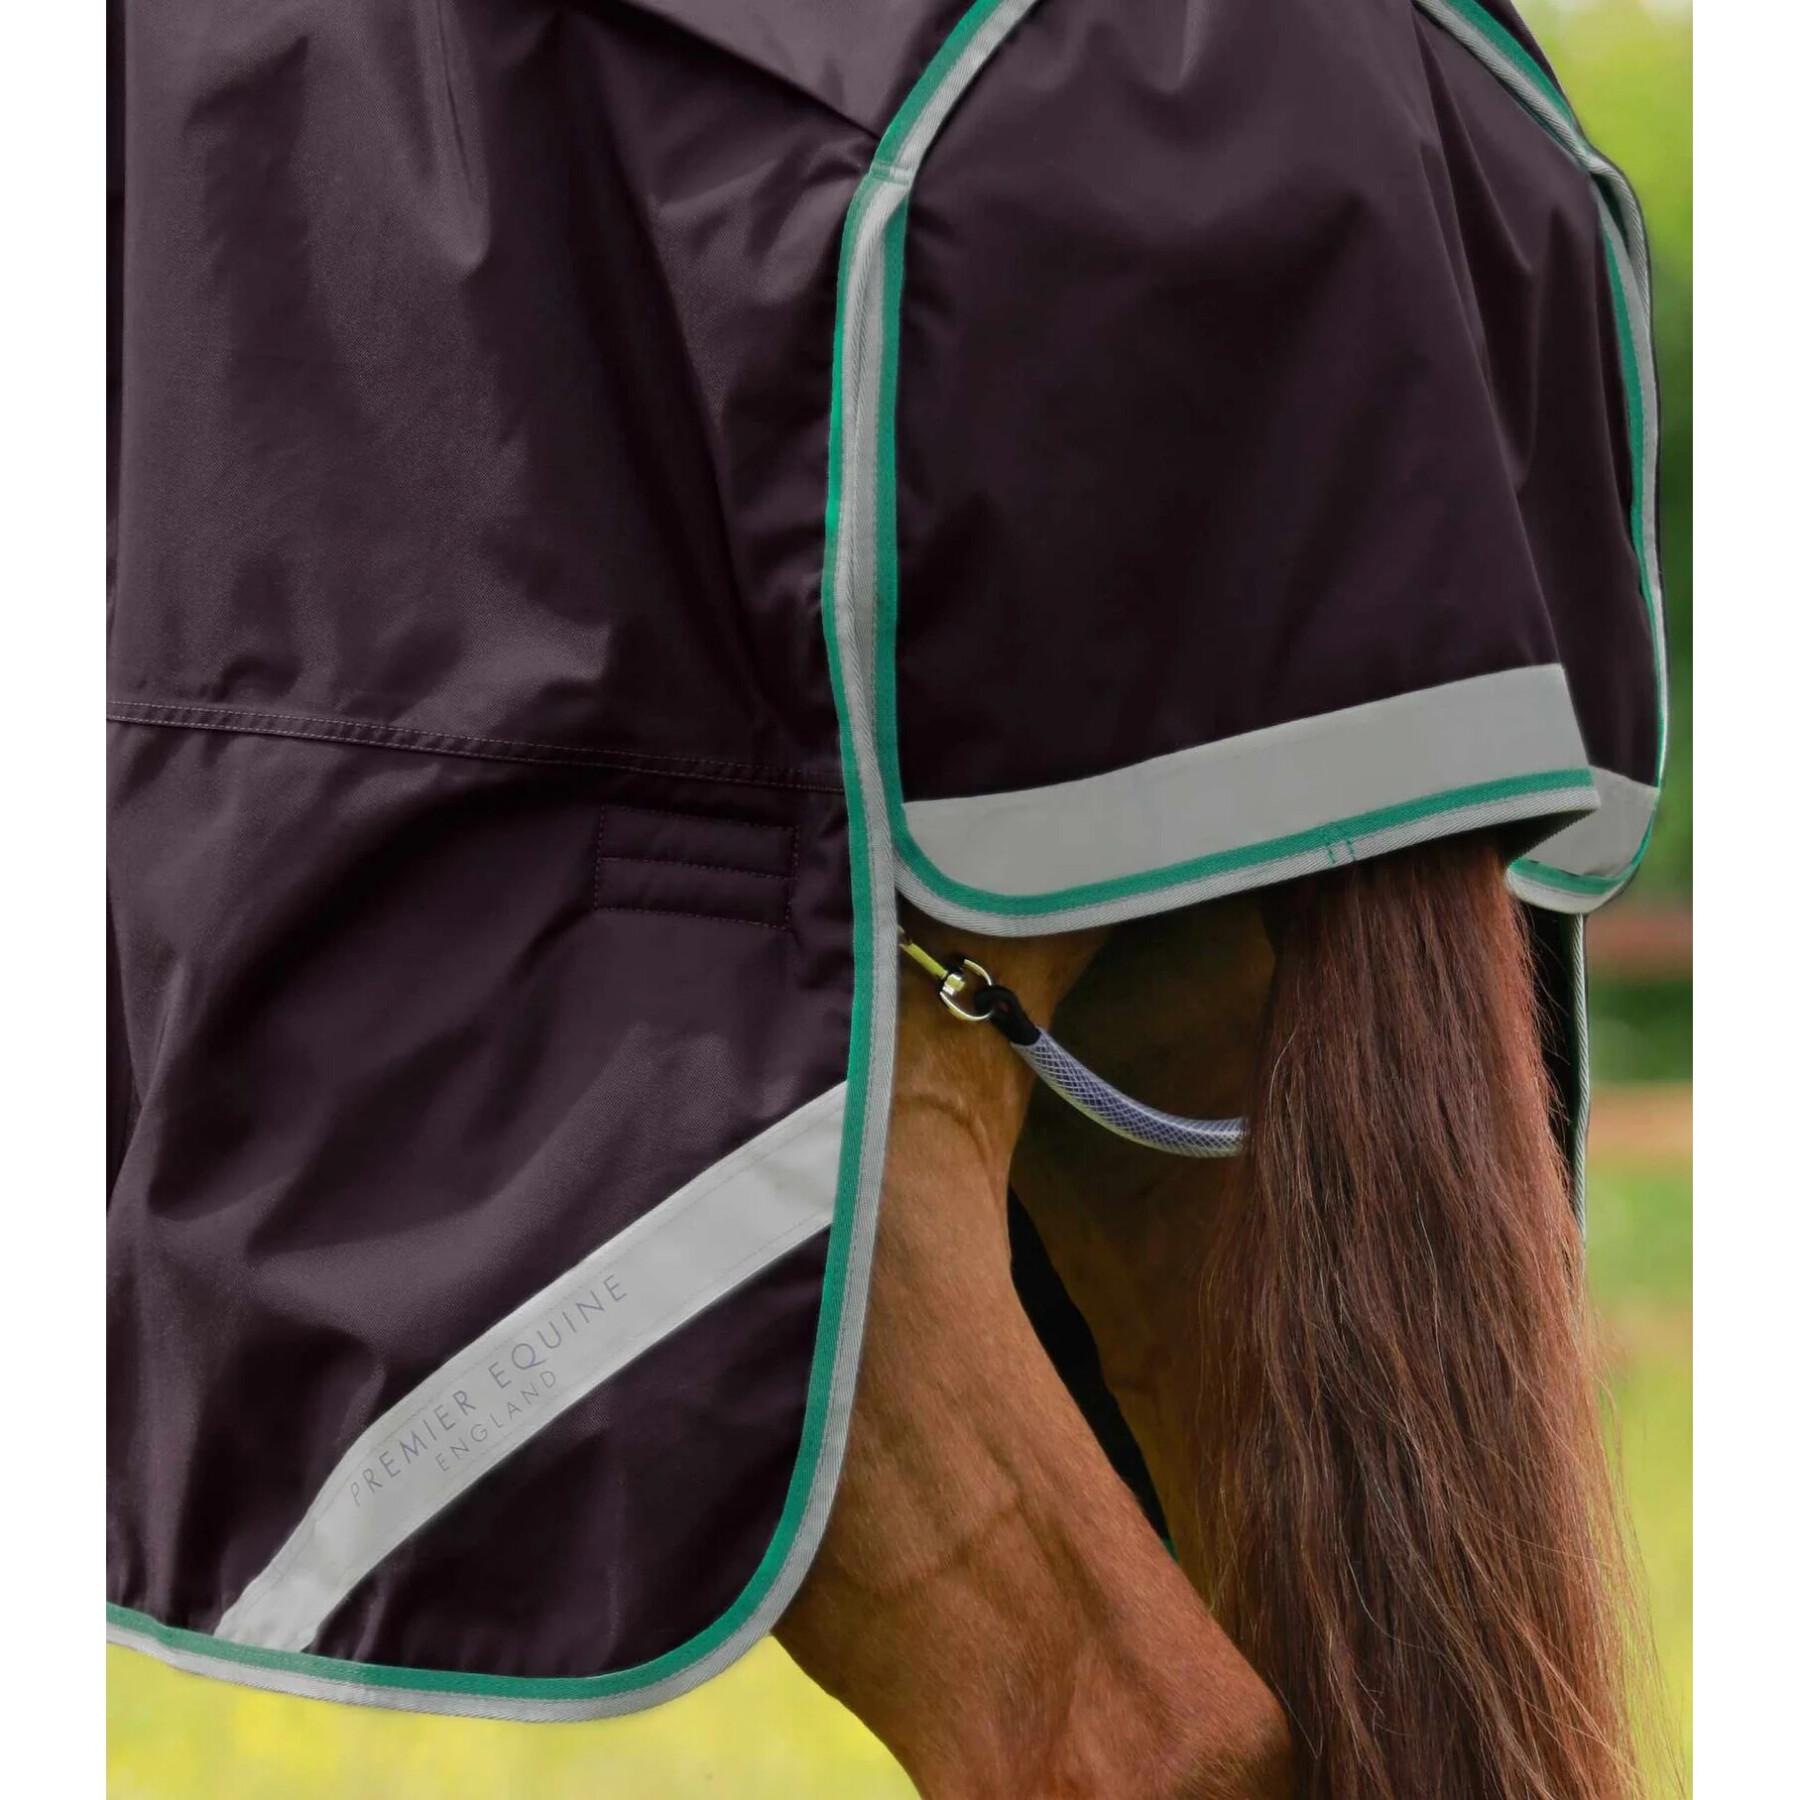 Waterproof outdoor horse blanket with neck cover Premier Equine Buster 200 g